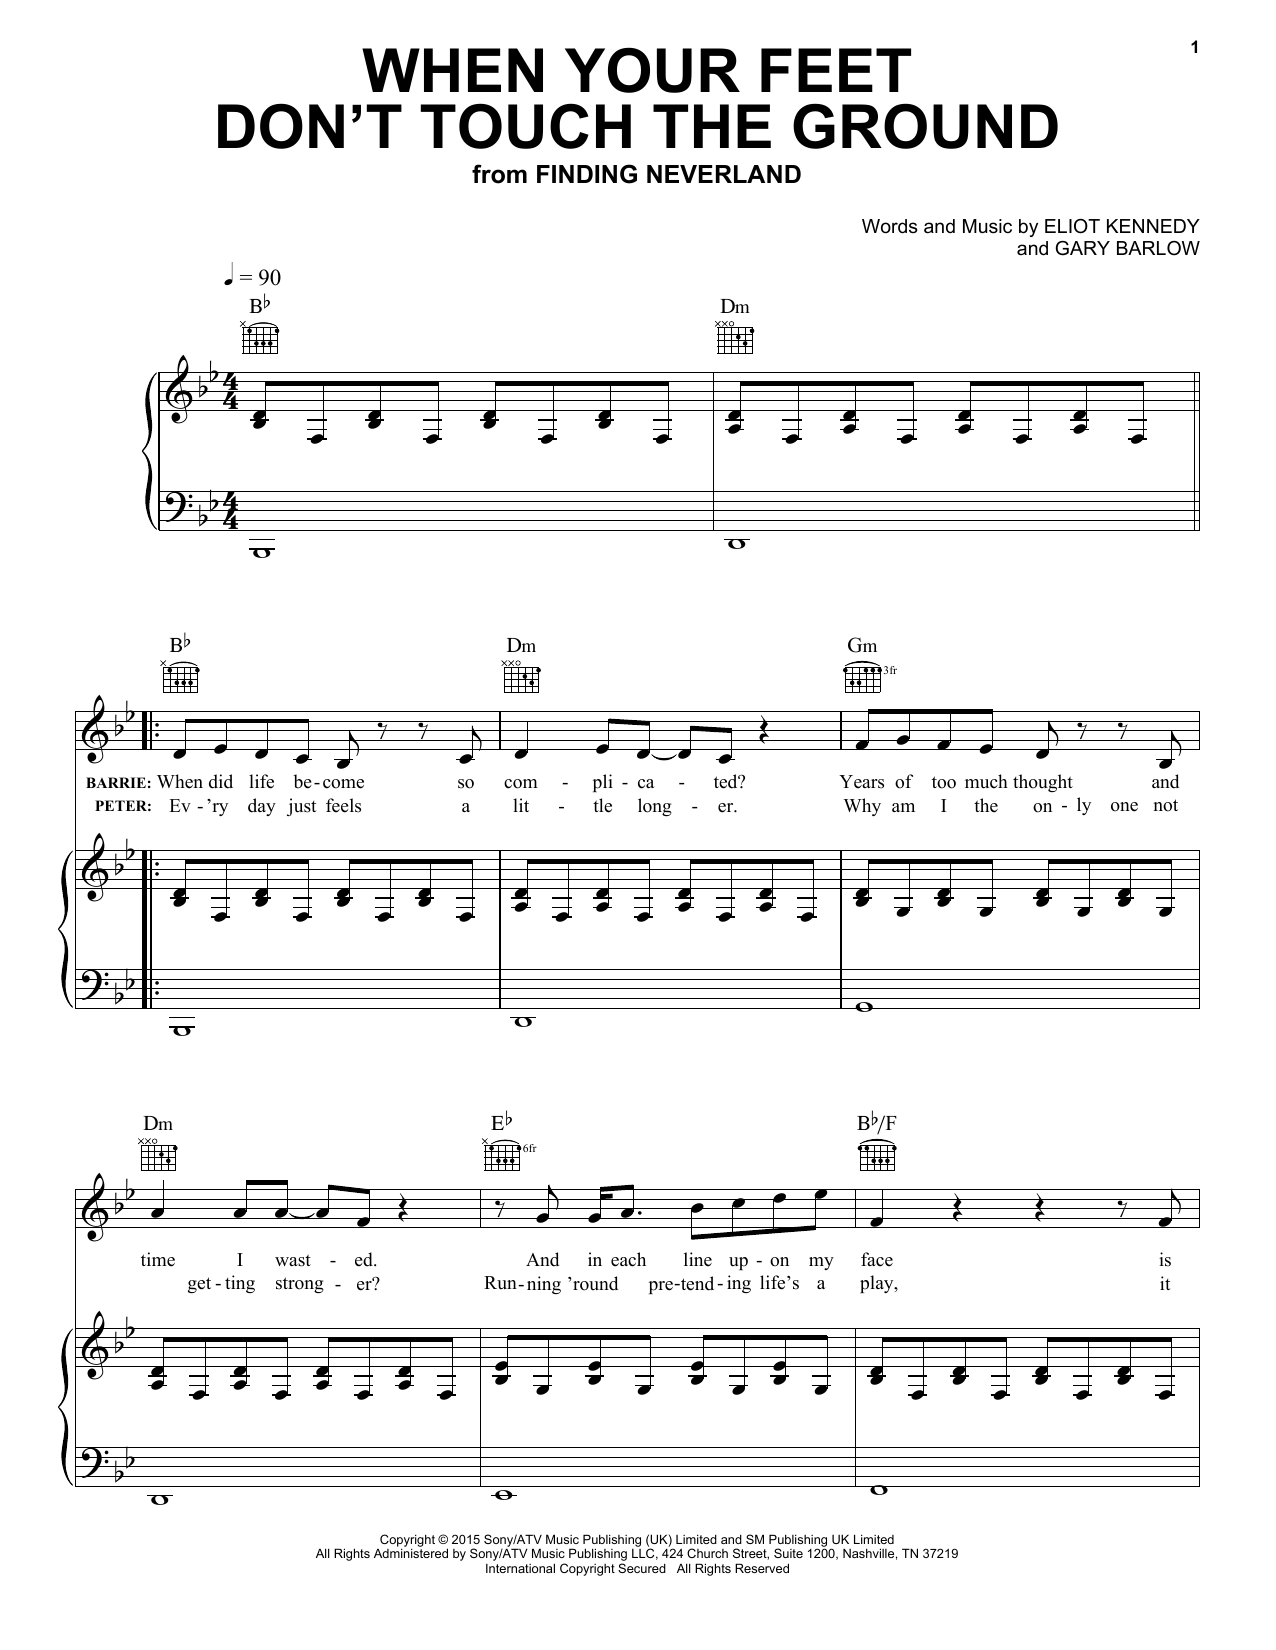 Download Eliot Kennedy When Your Feet Don't Touch The Ground Sheet Music